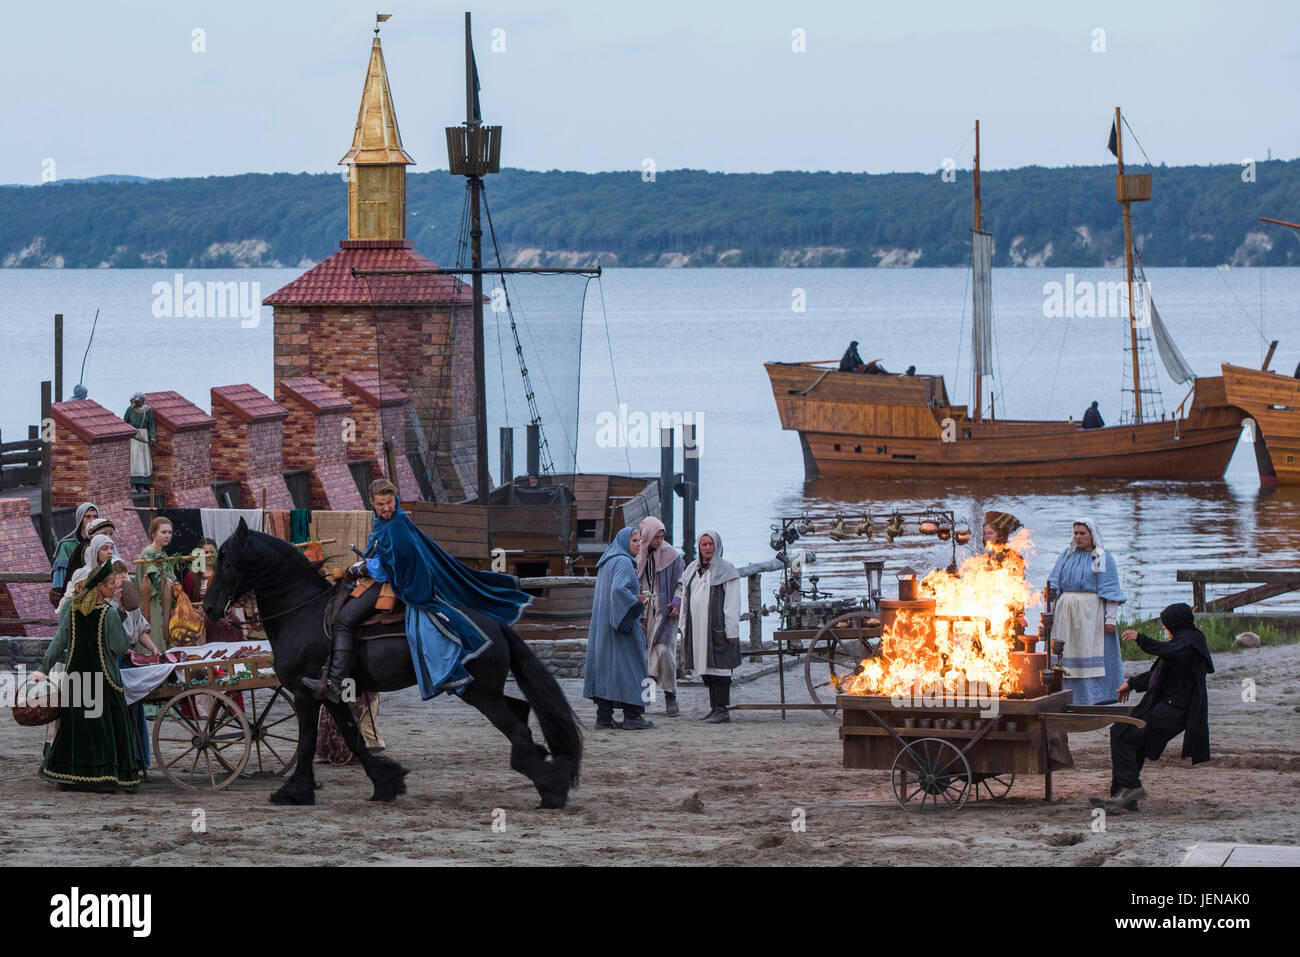 Bastian Semm as pirate Klaus Stoertebeker rides past a burning market stand at the nature stage in Ralswiek on Ruegen island, Germany, 21 June 2017. Tis year's production titled 'Im Schatten des Todes' (lit. 'In the Shadow of Death') premieres on 24 June 2017. The Stoertebeker Festival (German: 'Stoertebeker Festspiele') have been taken place for 25 years on Ruegen island. Photo: Jens Büttner/dpa-Zentralbild/dpa Stock Photo